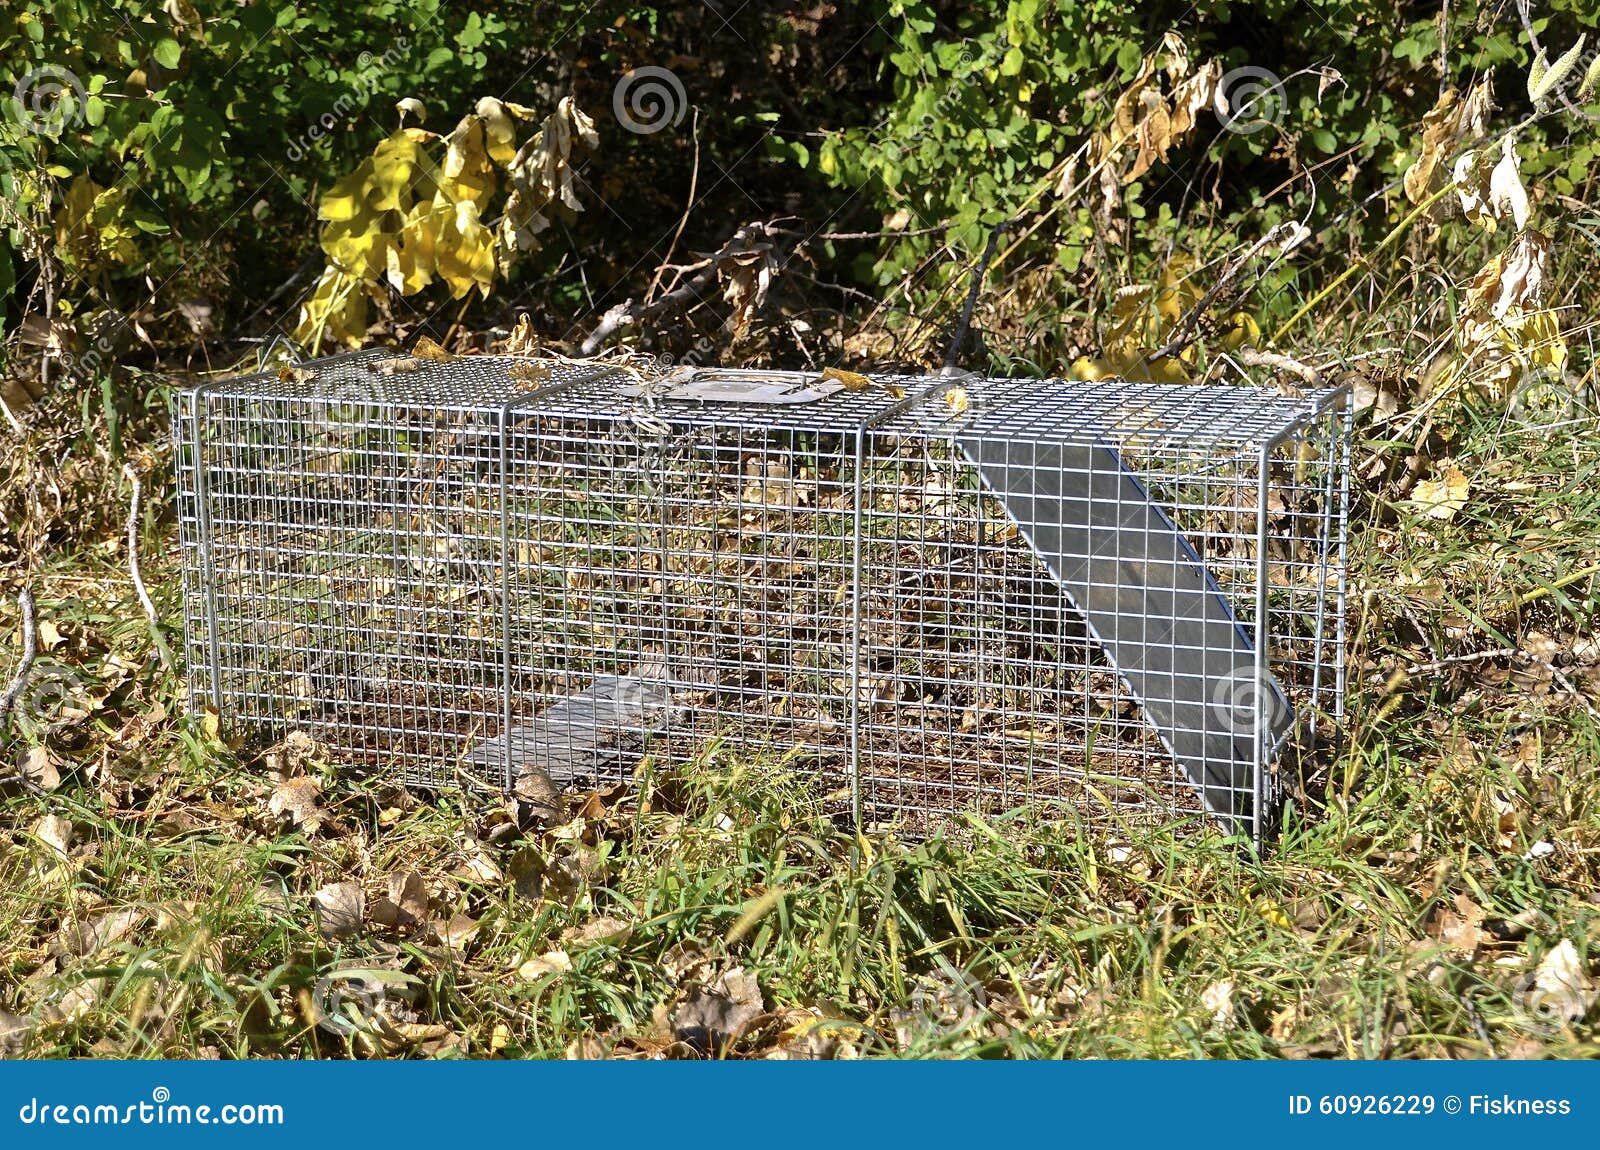 https://thumbs.dreamstime.com/z/live-trap-rectangular-wire-sets-bushes-waiting-to-catch-remove-unwelcome-animal-60926229.jpg